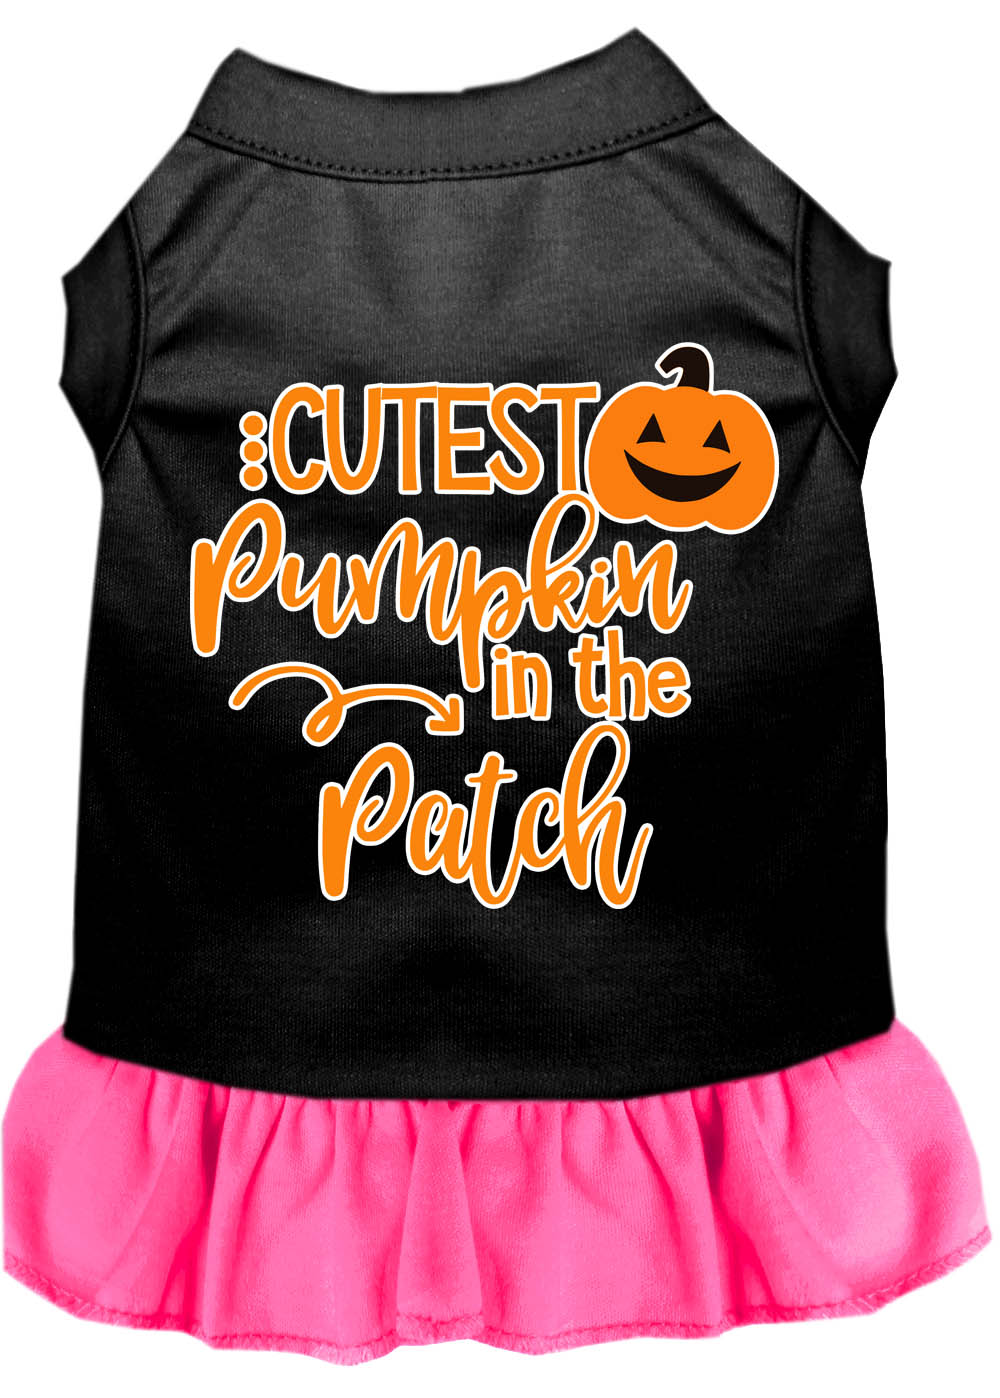 Cutest Pumpkin in the Patch Screen Print Dog Dress Black with Bright Pink Lg